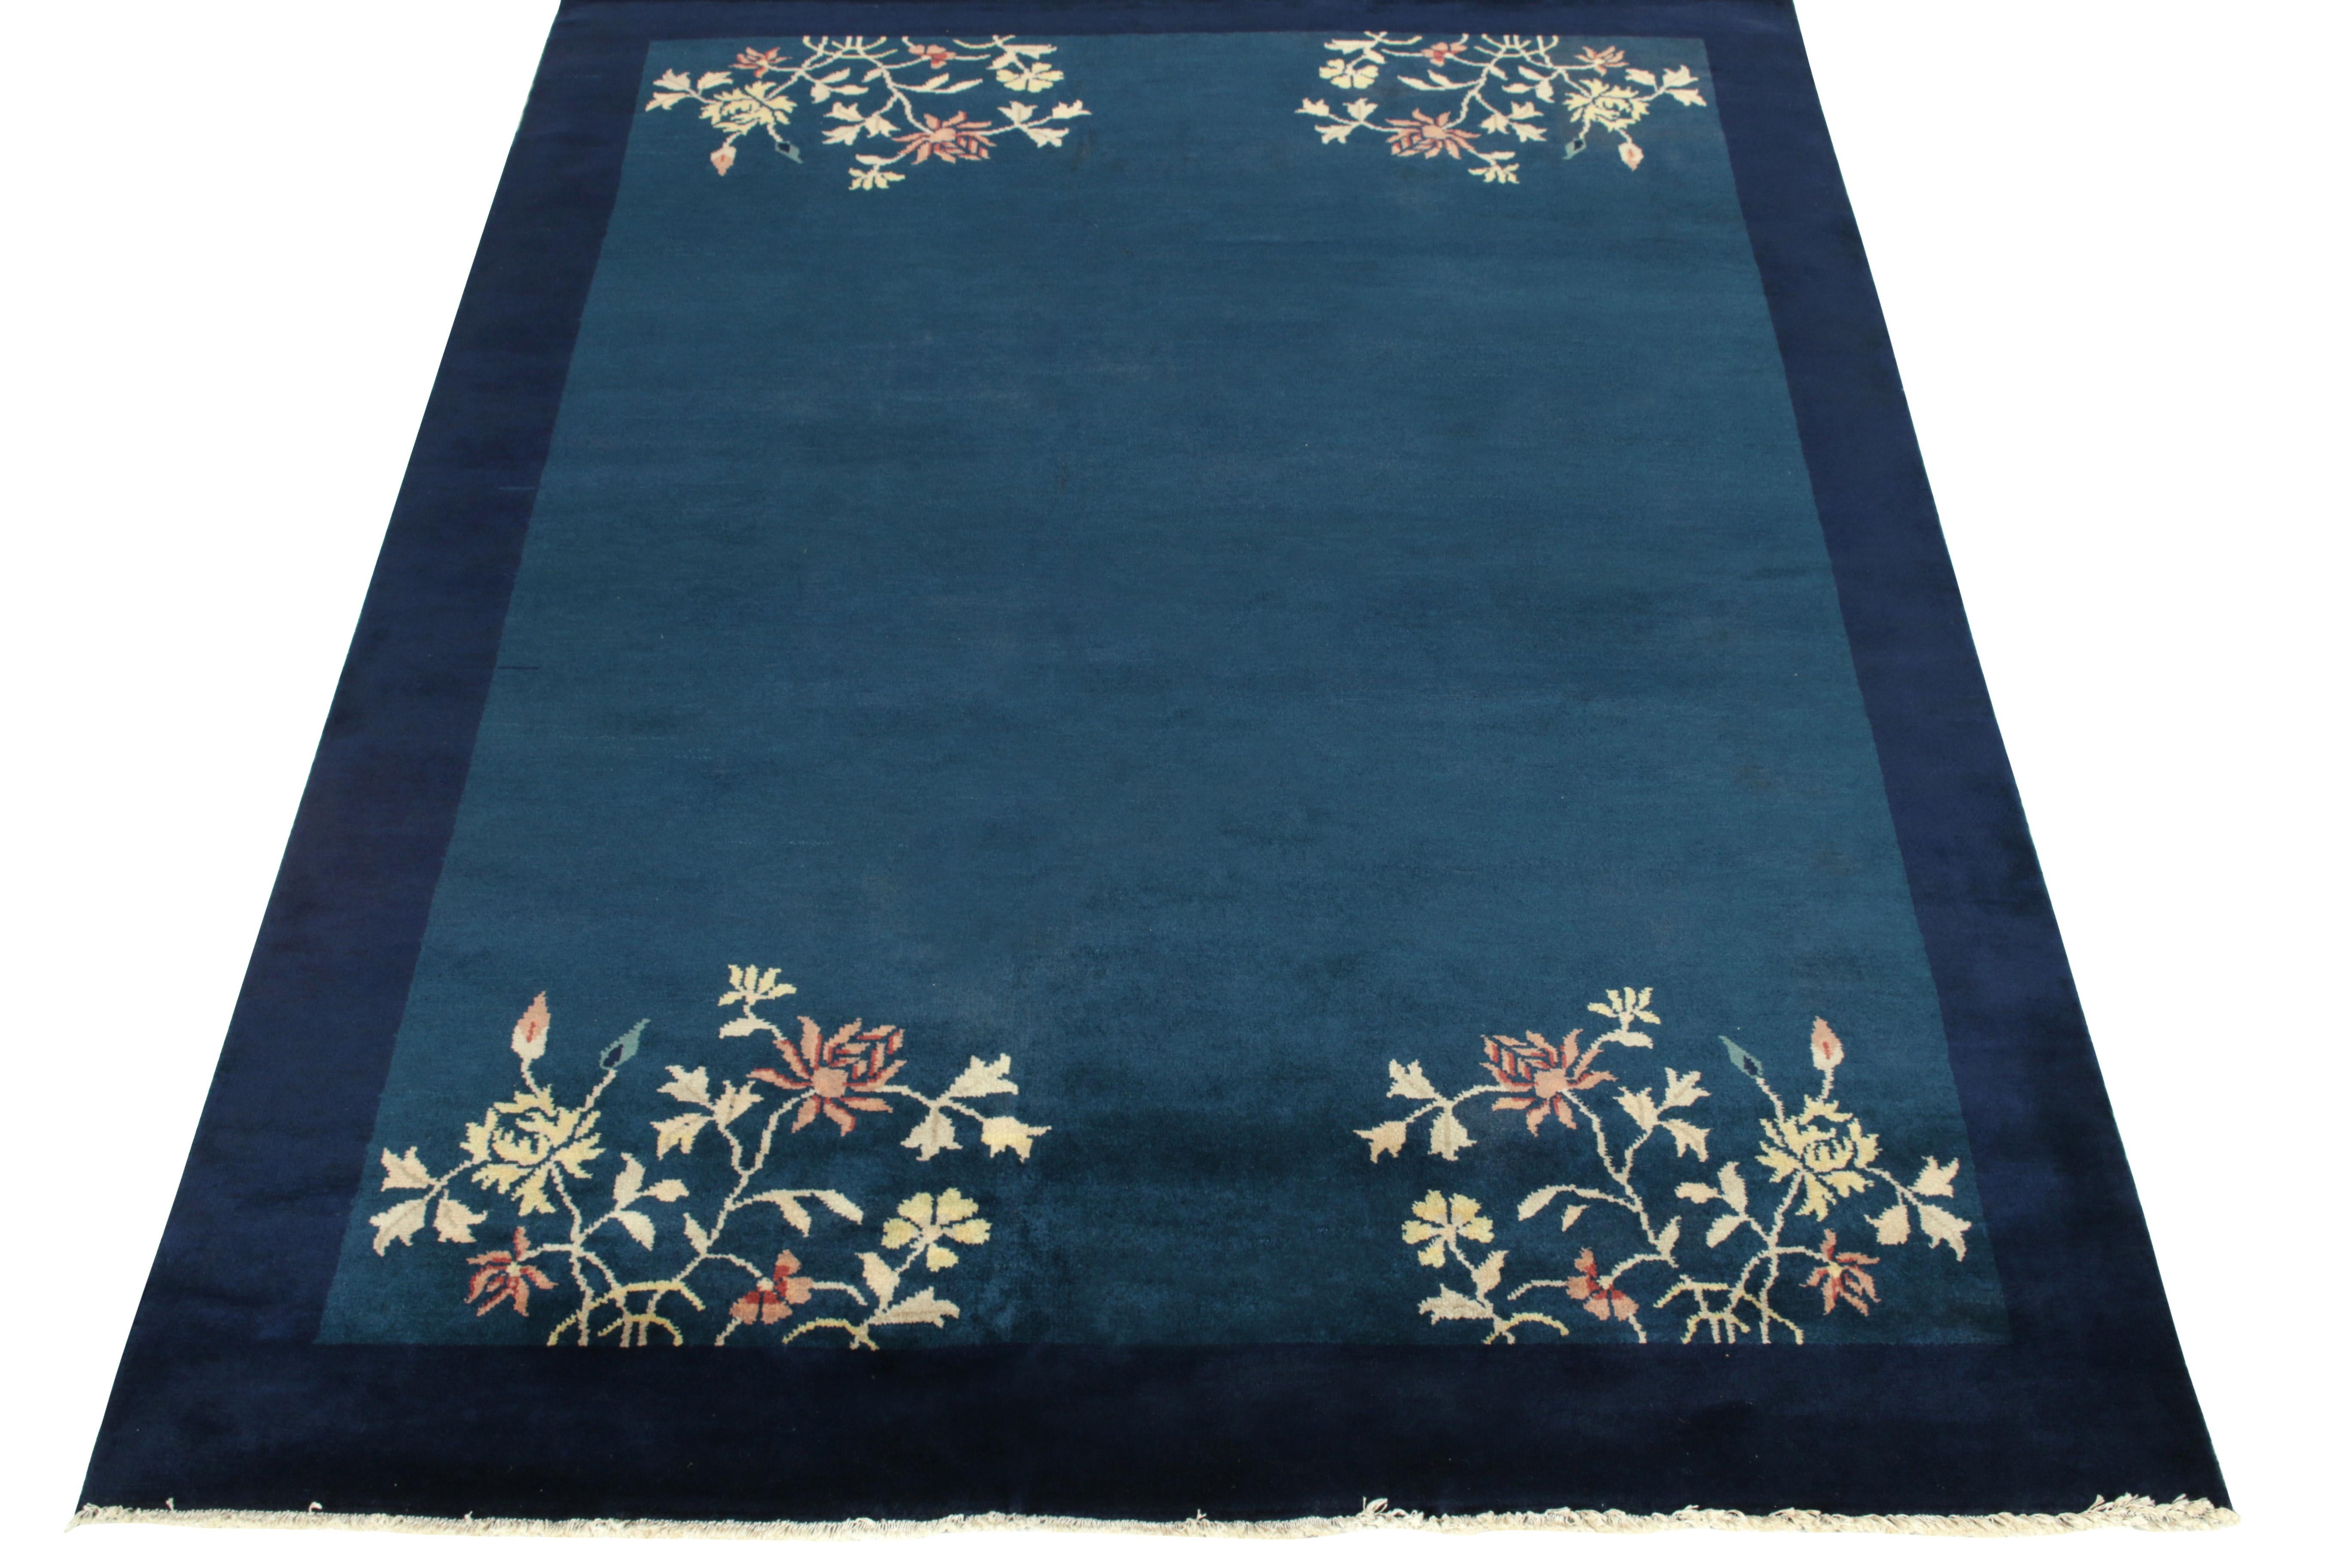 Hand-knotted in wool, a vintage 5x7 ode to Chinese art deco rug from our Antique & Vintage collection, inspired by classic sensibilities of the 1920s. The rug enjoys a healthy pile in tones of blue complementing the light dark spots on the field for